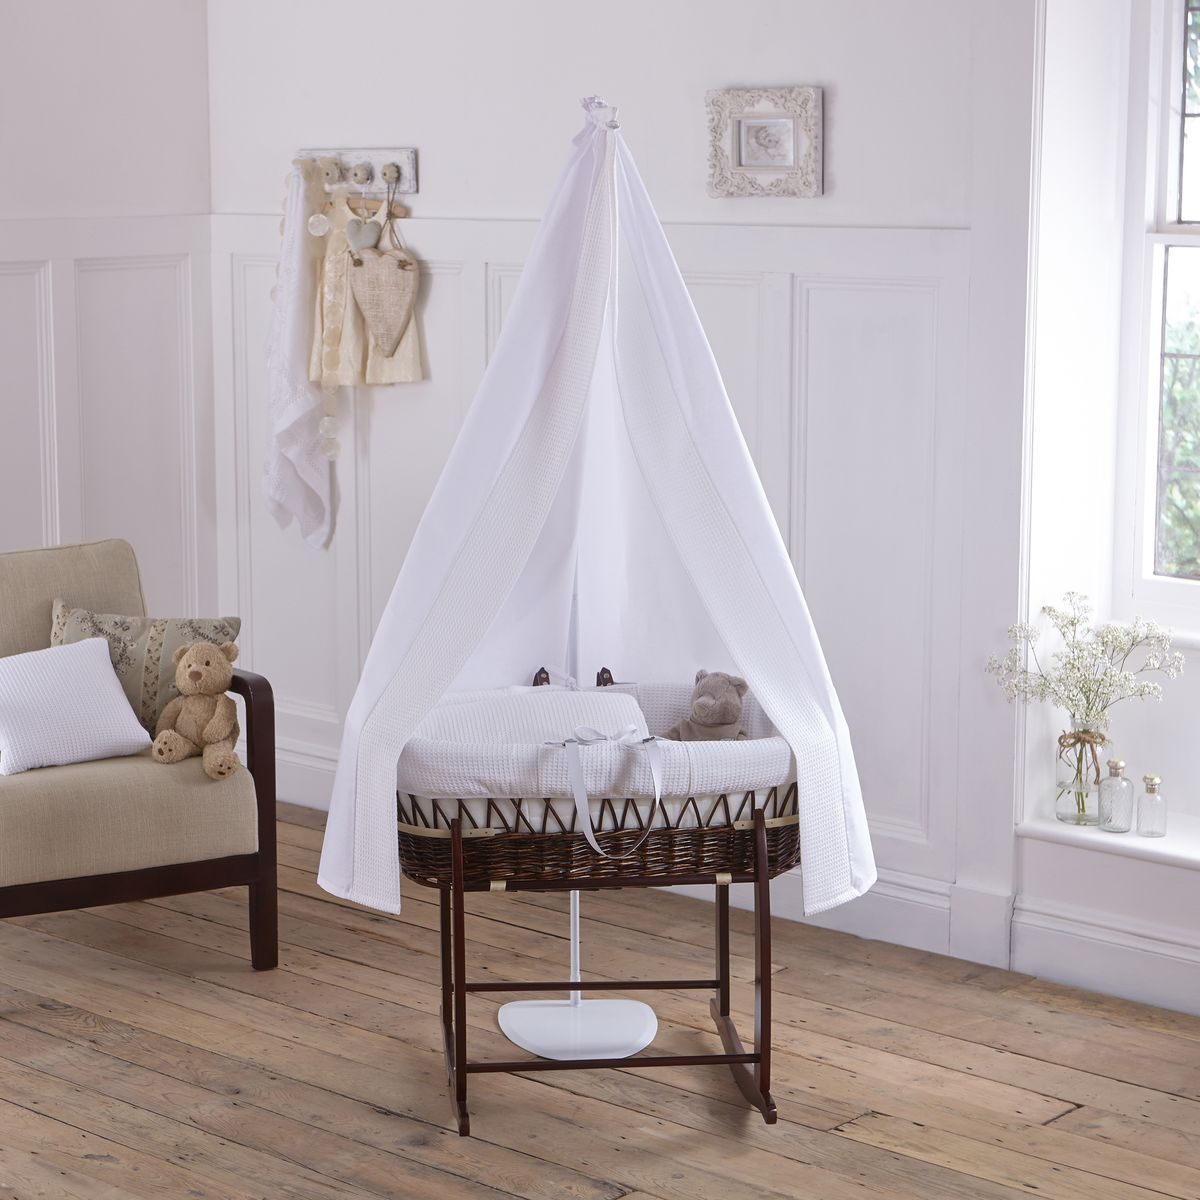 CANOPY drape-to fit baby swinging crib/wicker basket/craddle CANOPY HOLDER 